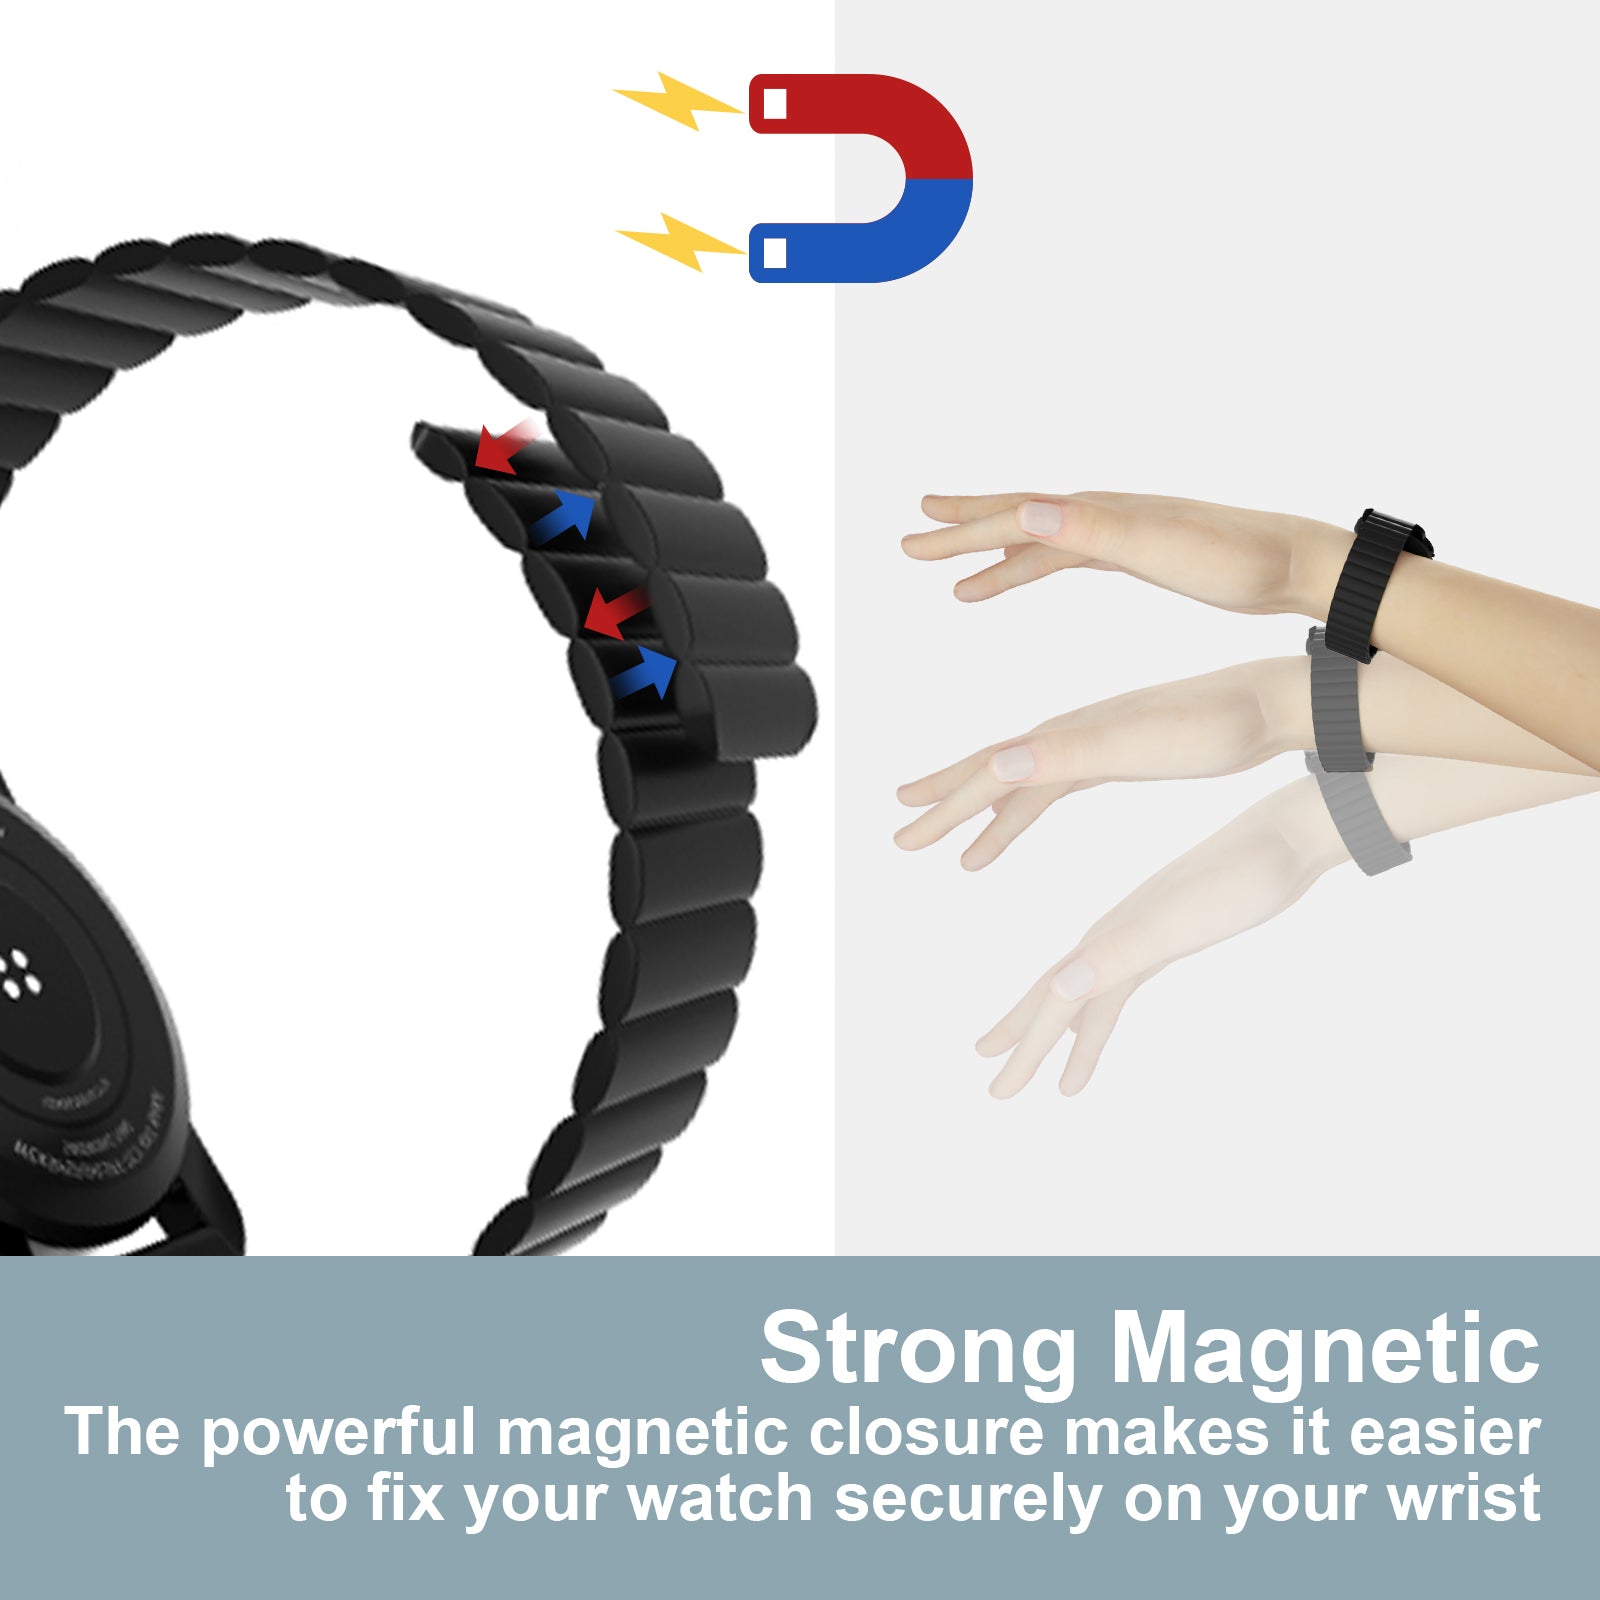 The powerful magnetic closure makes it easier to fix your watch securely on your wrist